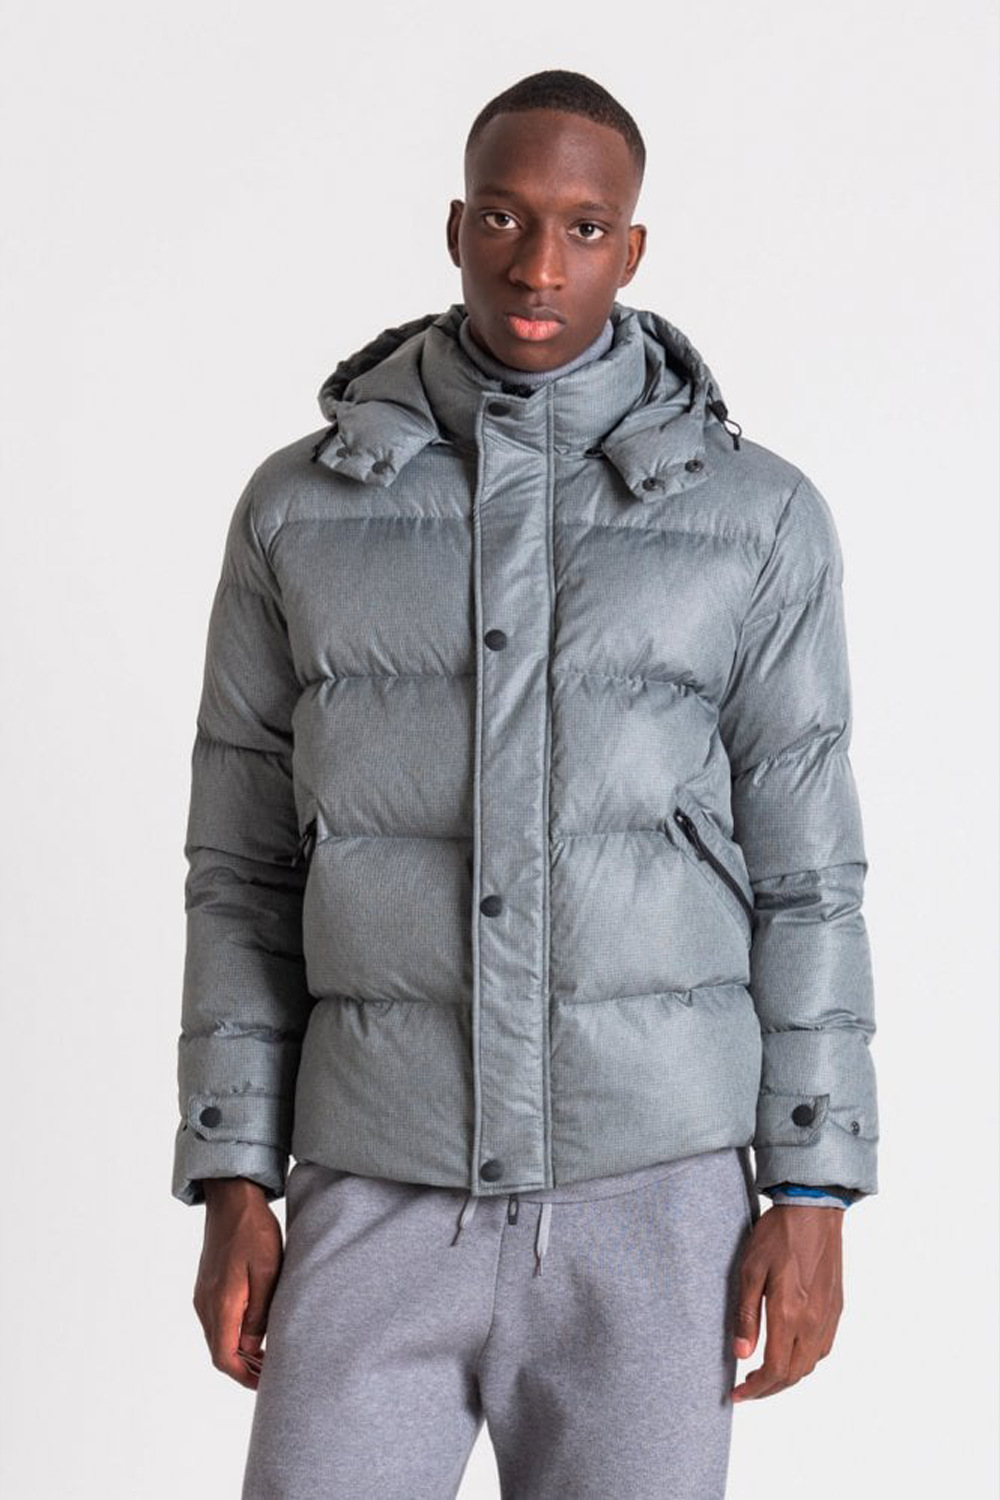 Buy the Antony Morato Padded Tech Hood Jacket in Grey at Intro. Spend £50 for free UK delivery. Official stockists. We ship worldwide.